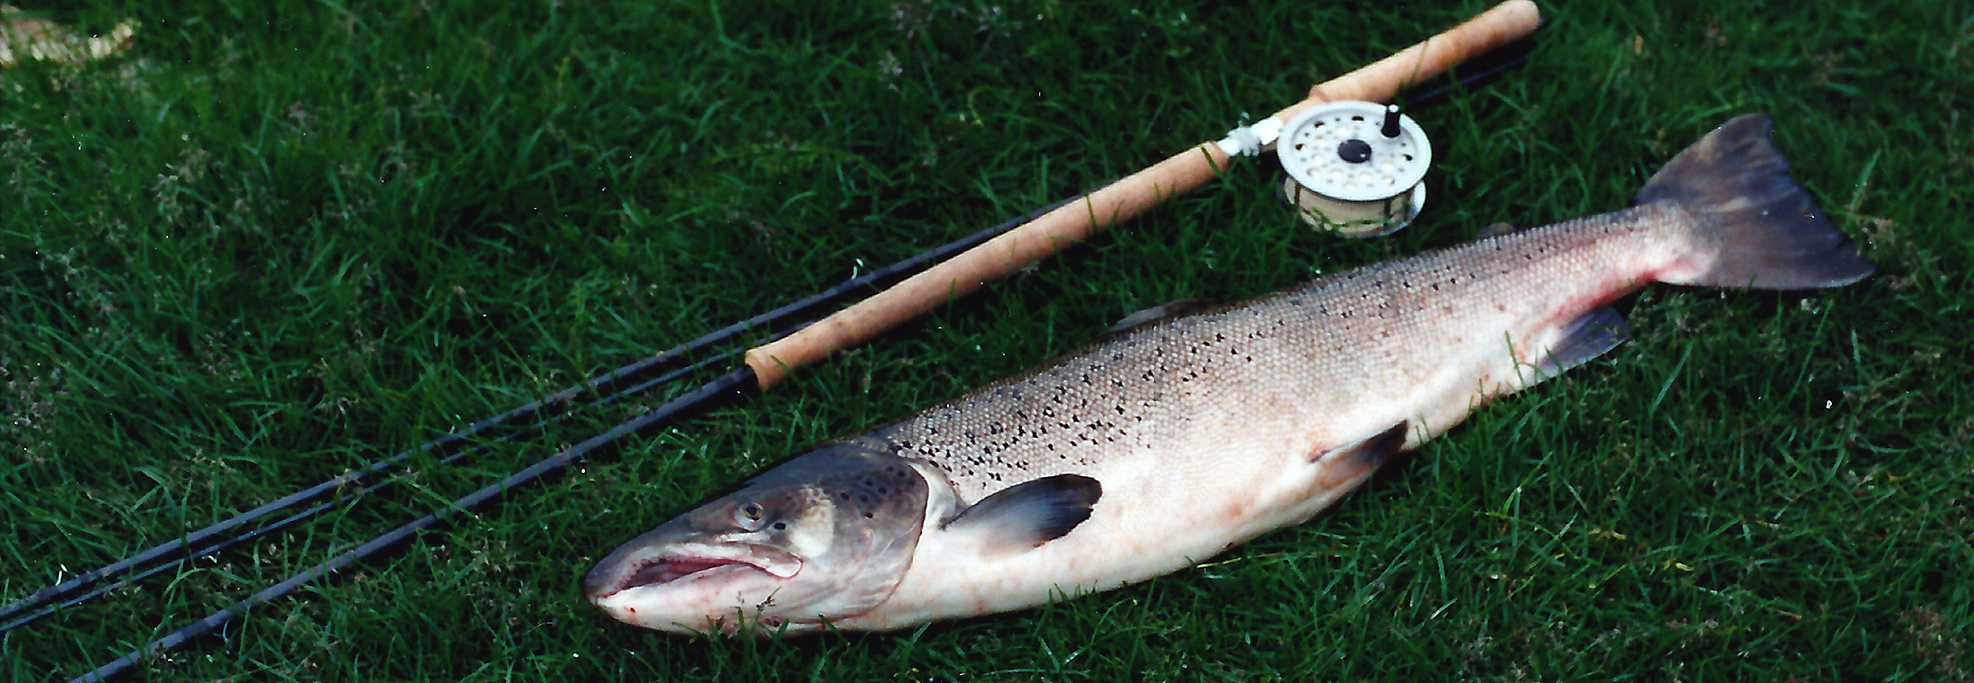 salmon 15pounds caught by Willi Furrer